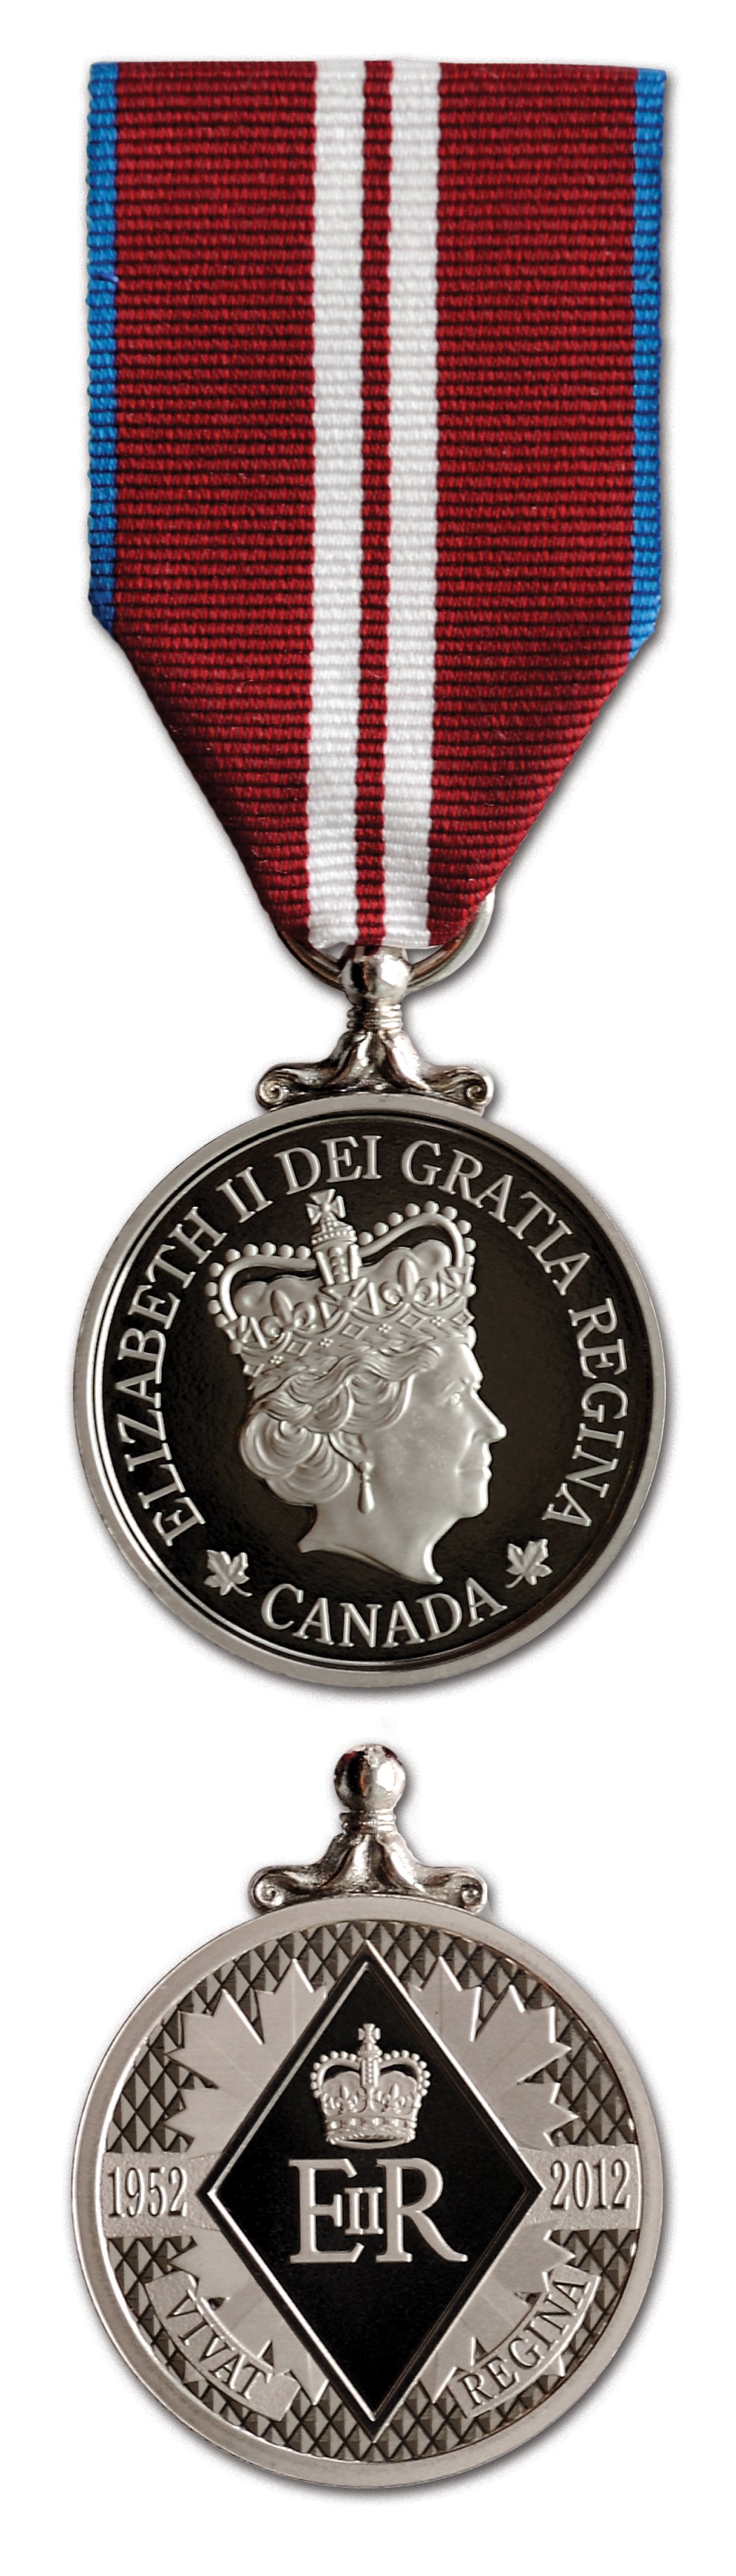 For his work in this area for the last twenty-five years, Gary was the recipient of The Queen Elizabeth II Diamond Jubilee Medal